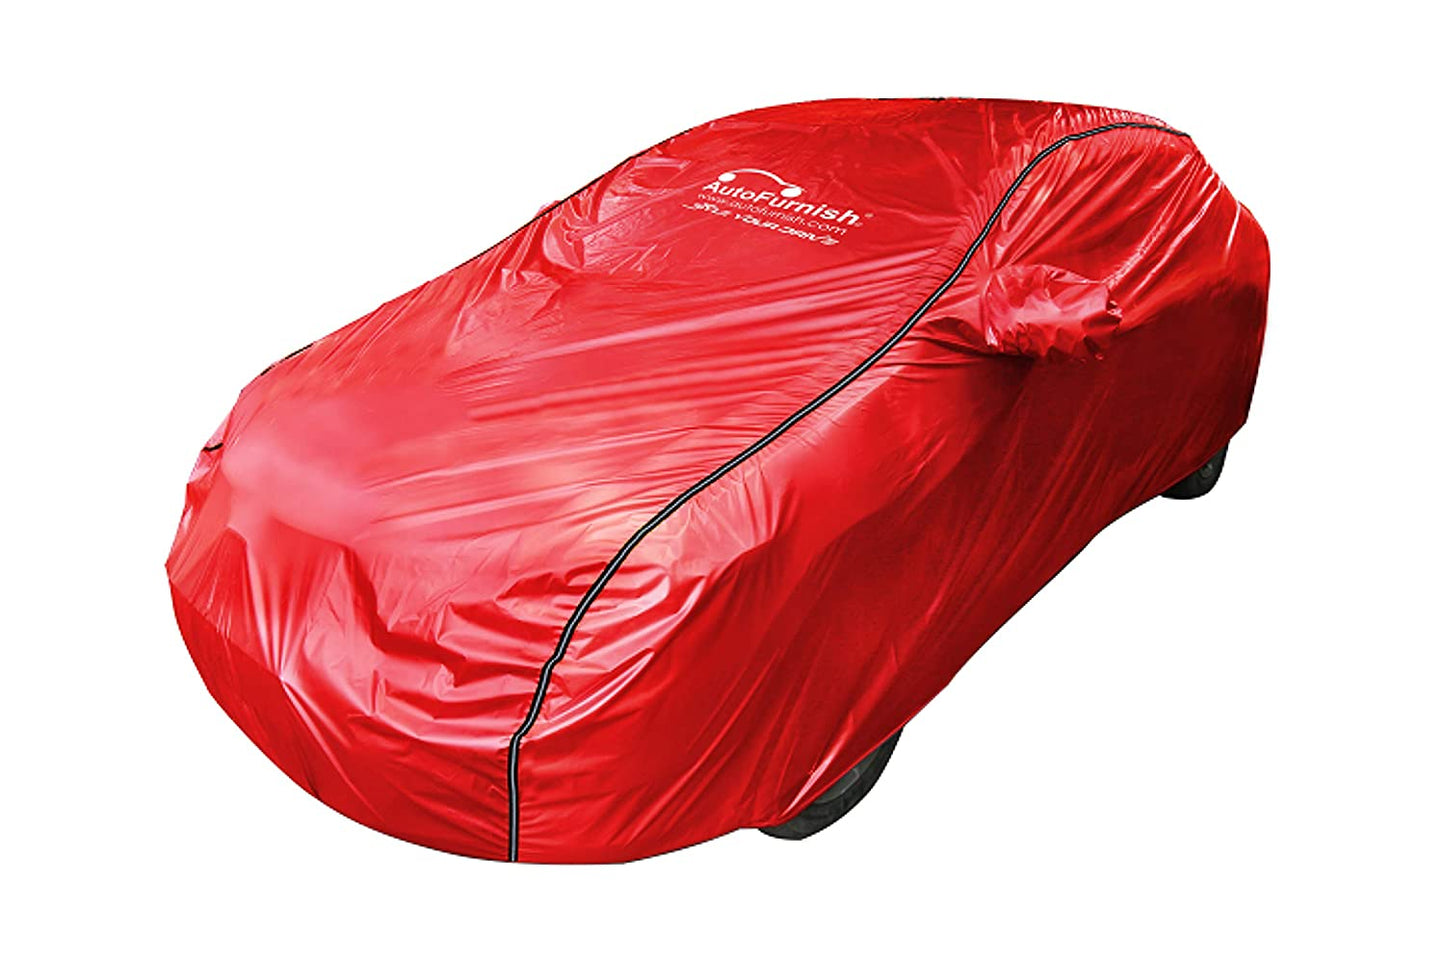 Lexus ES300h 2018 Waterproof Car Cover, All Weather Proof, Premium & Long Lasting Fabric with Side Mirror Pocket (ACHO Series)